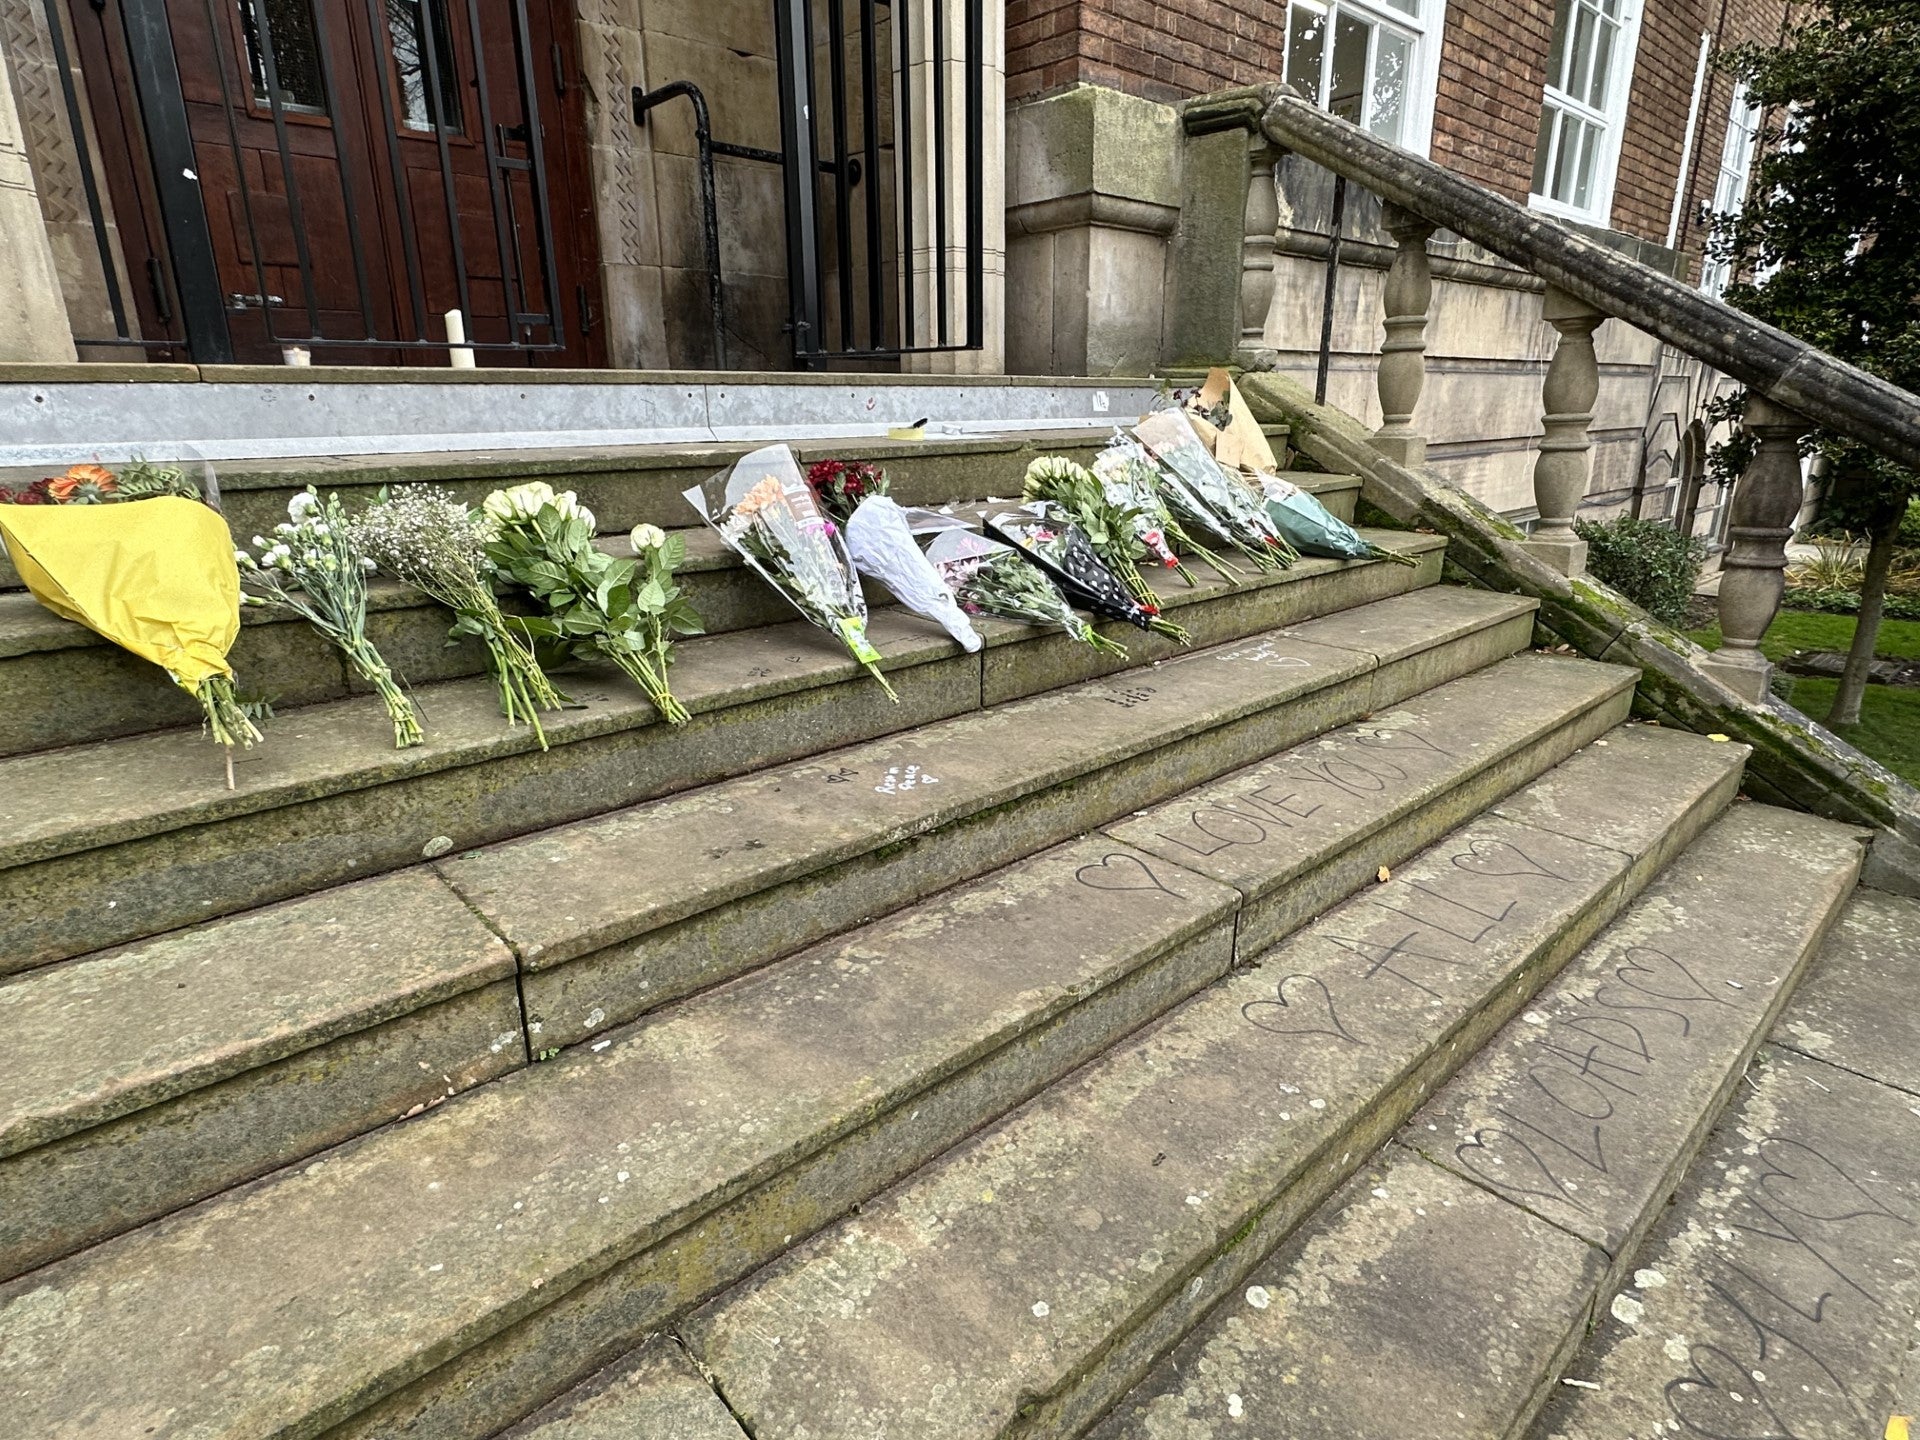 The words, ‘Love you all loads. Fly high’ were written on the stone staircase below a floral tribute at Shrewsbury College’s English Bridge campus